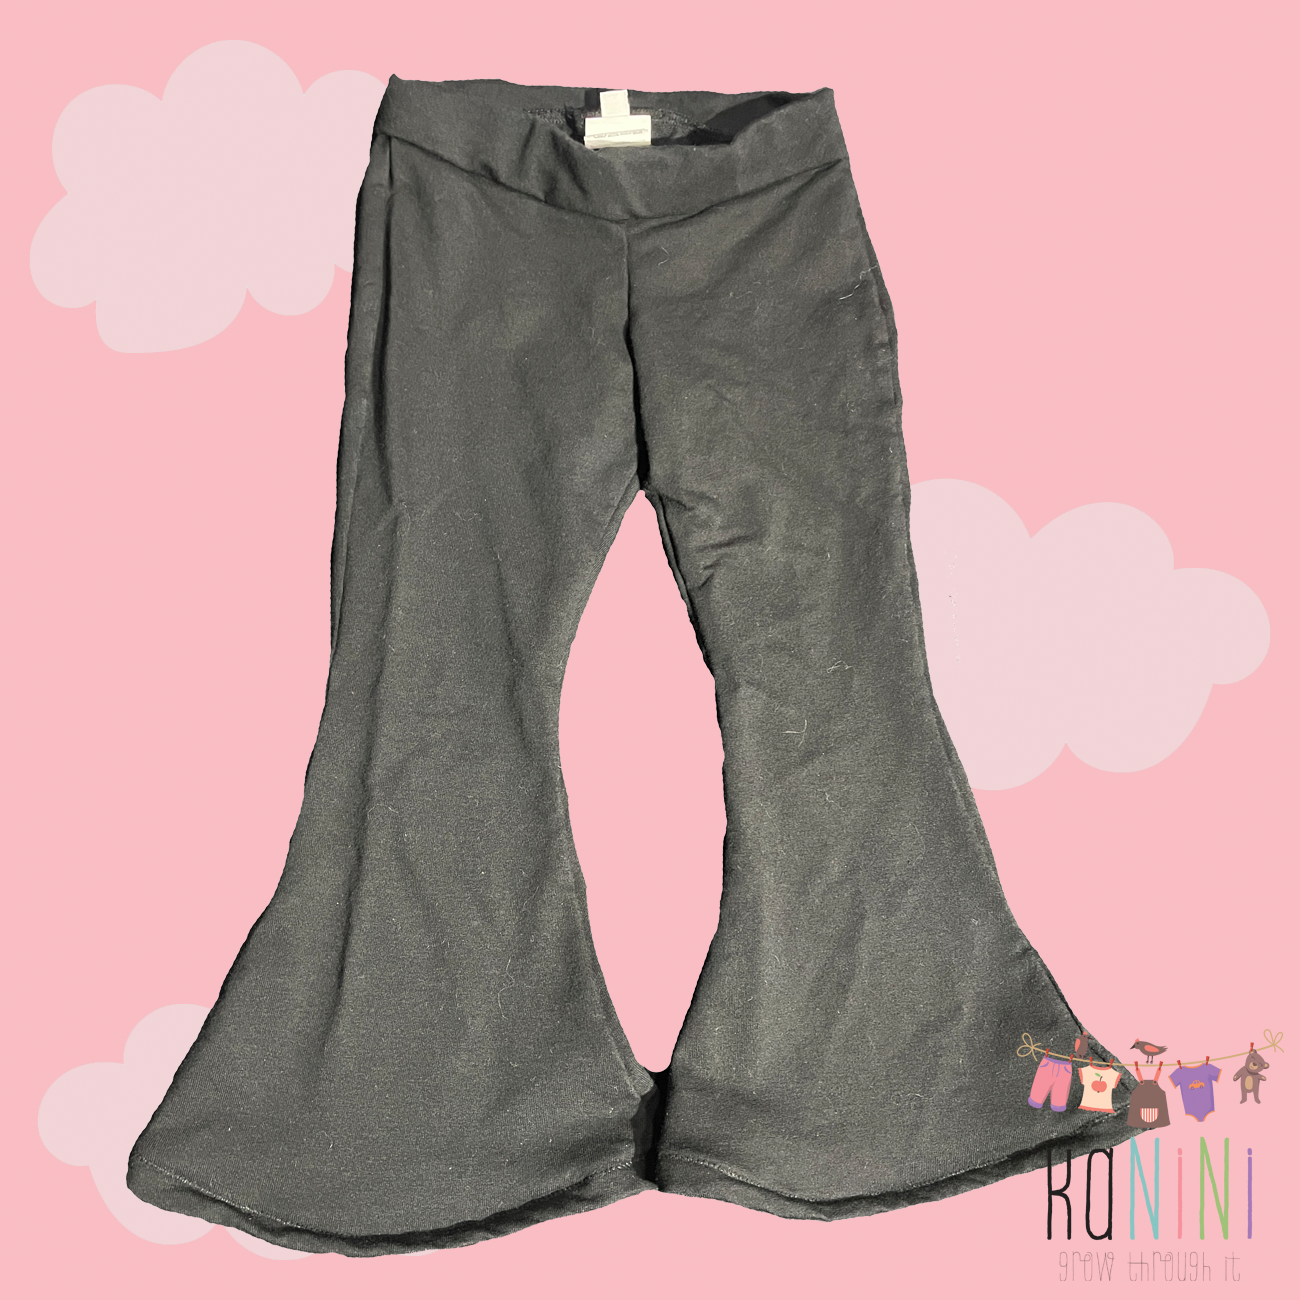 Featured image for “Babymusthaves 4 Years Girls Bellbottom Legging”